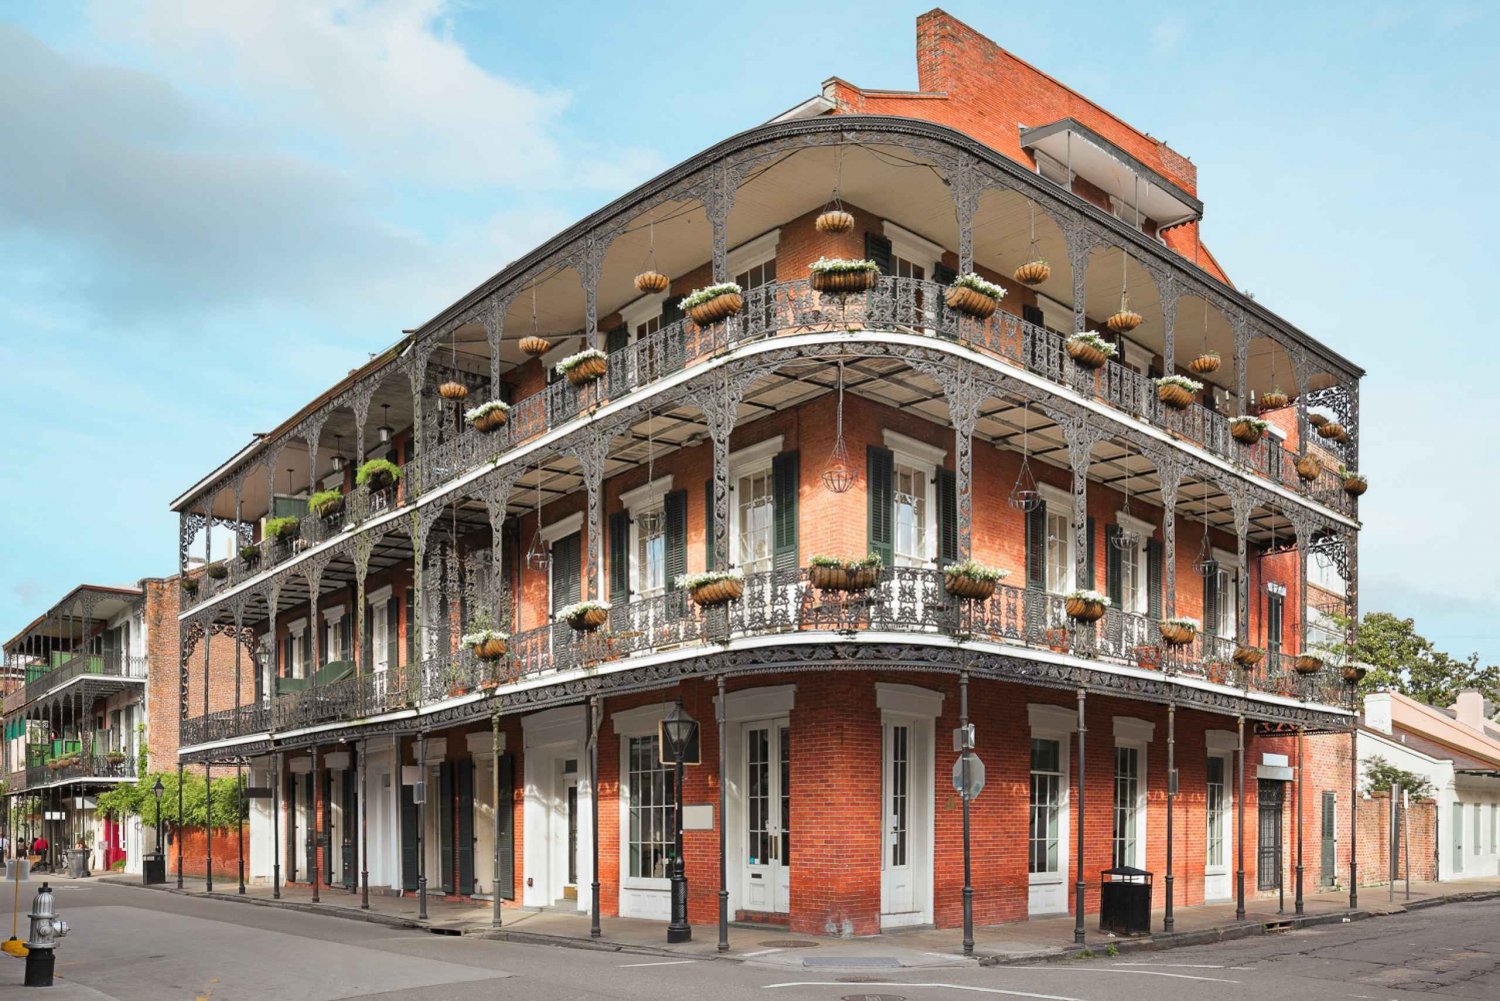 New Orleans French Quarter History and Hauntings Tour